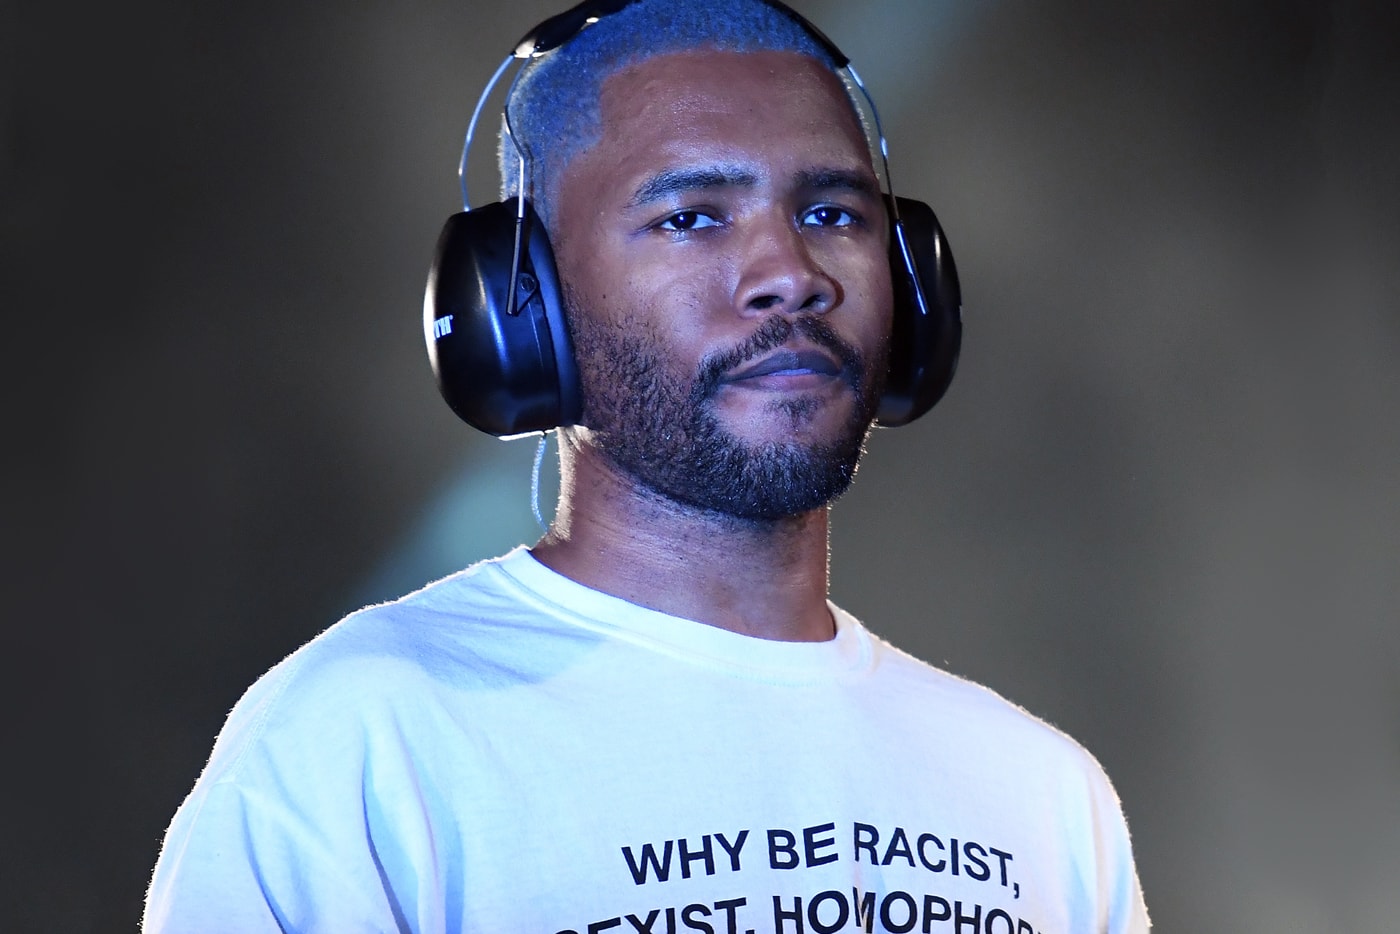 Frank Ocean Fans Are So Mad They Made a 'Boys Don't Cry' Diss